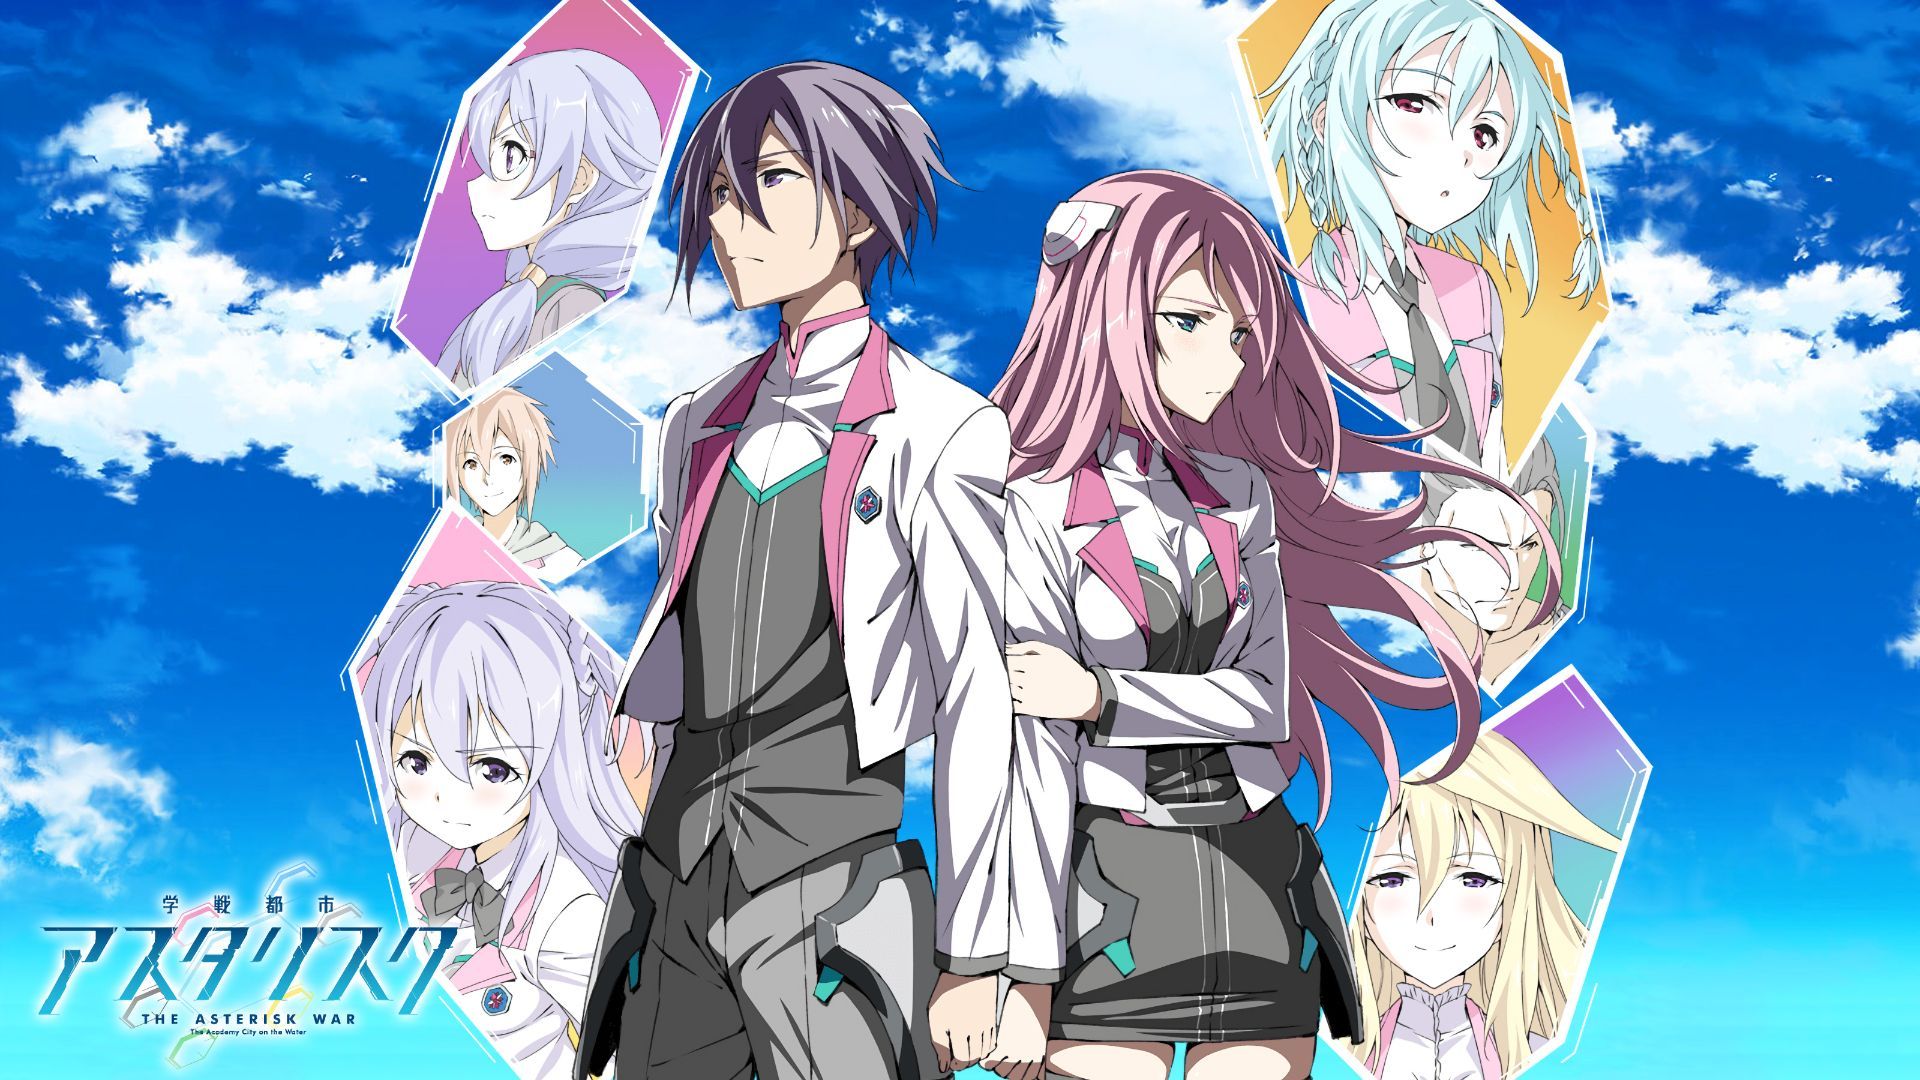 Gakusen Toshi Asterisk - Gakusen Toshi Asterisk Episode 1 is now